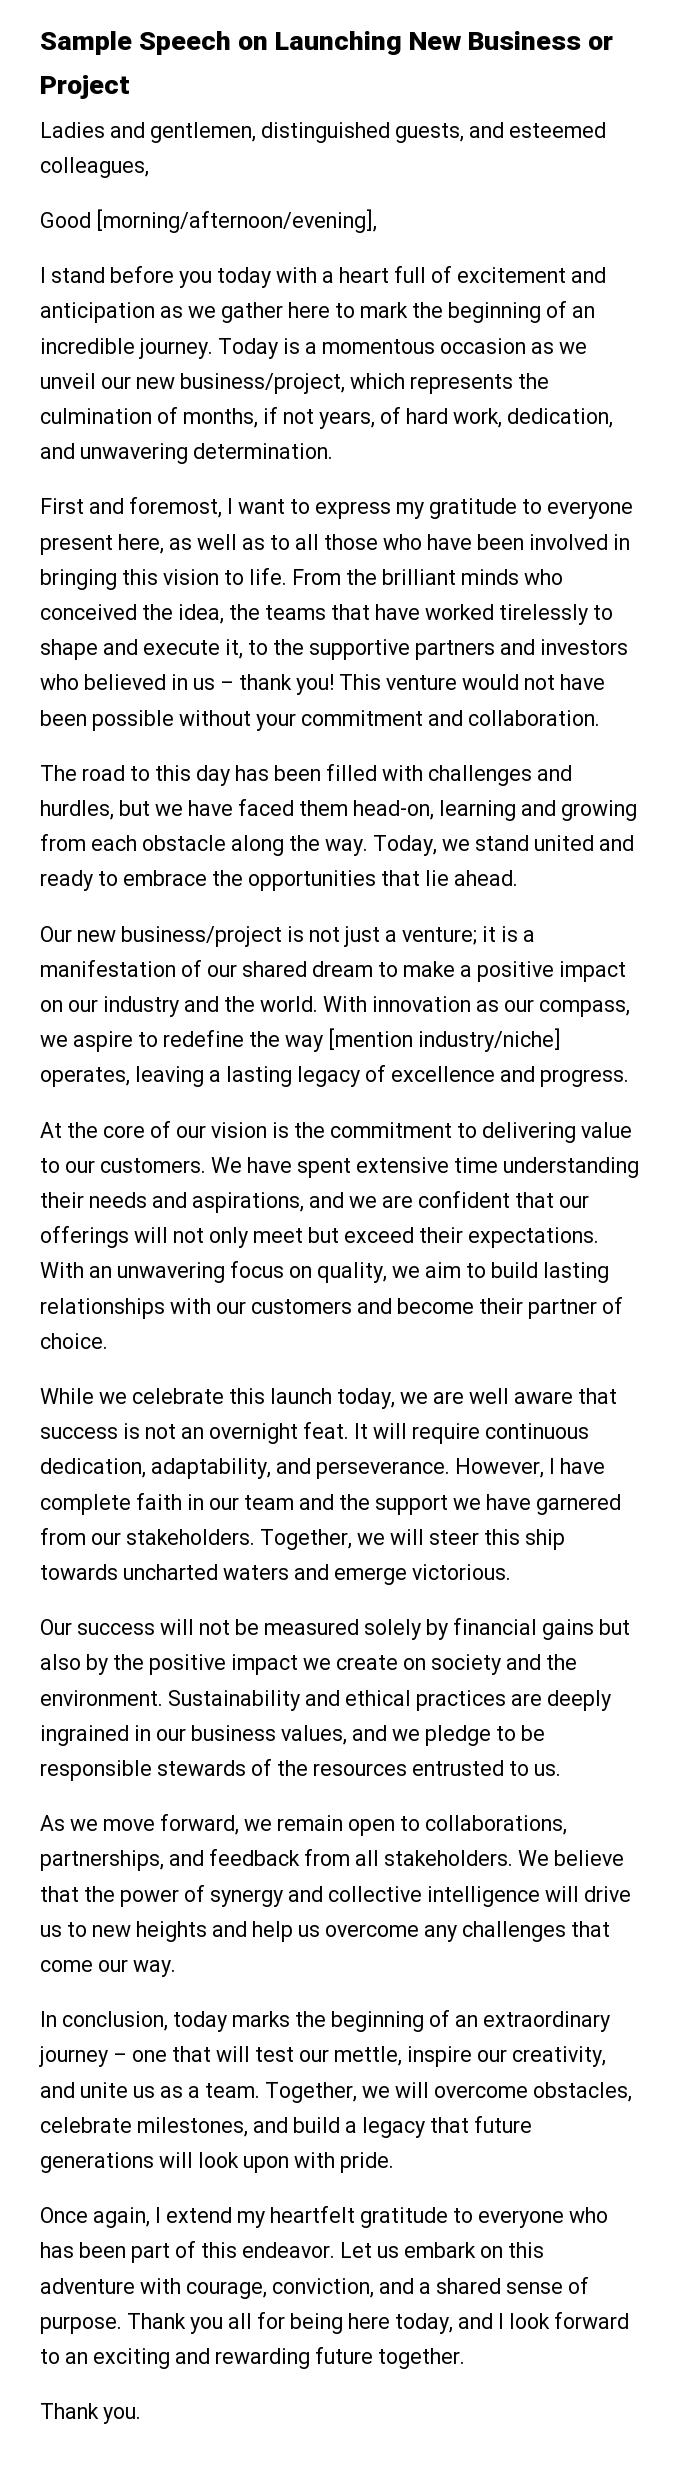 Sample Speech on Launching New Business or Project